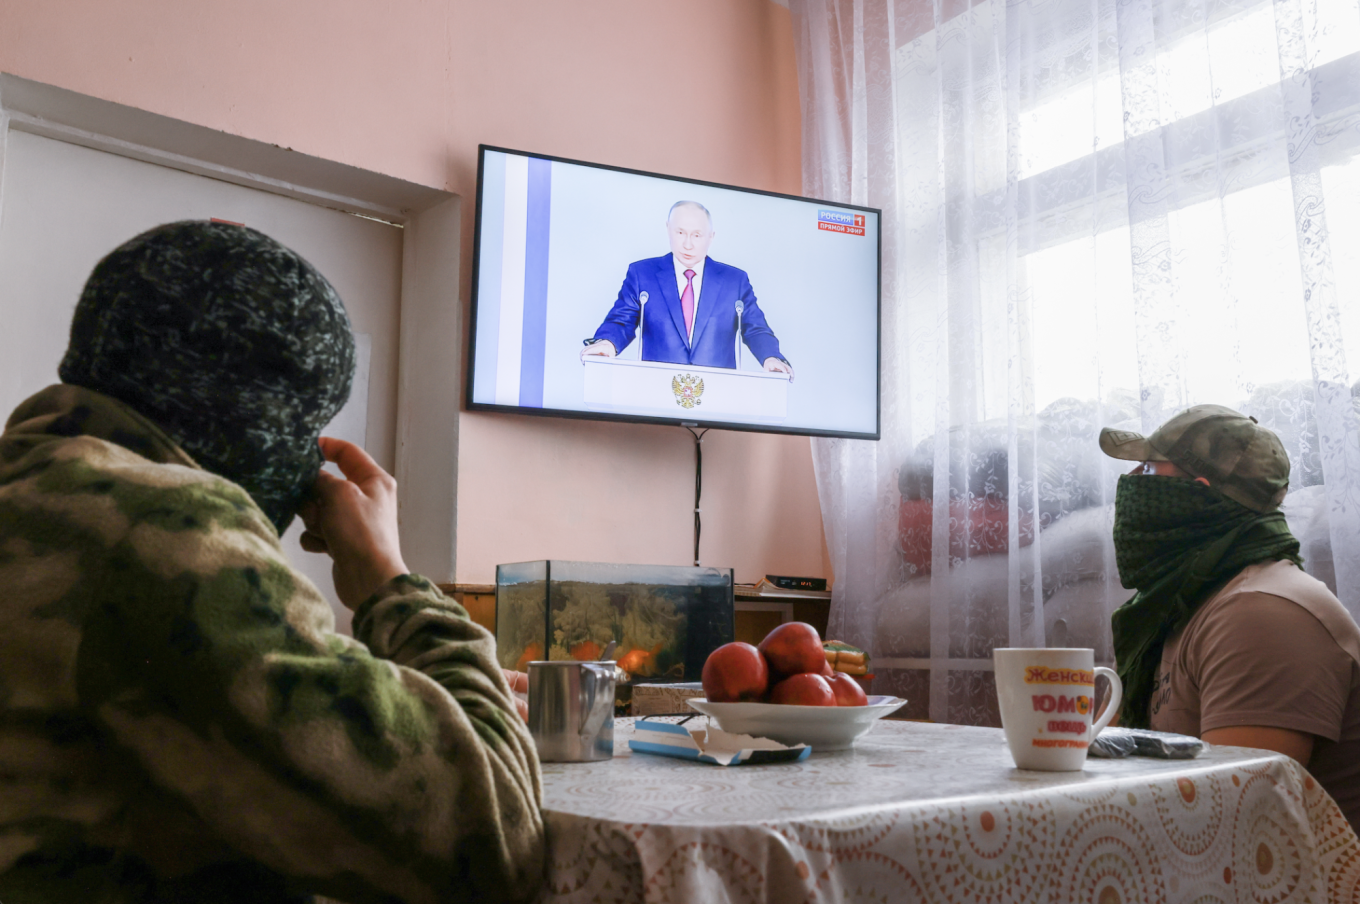 
					Russian soldiers at a military hospital in the occupied Donetsk region watch a speech by Putin.					 					Vladimir Gerdo / TASS				